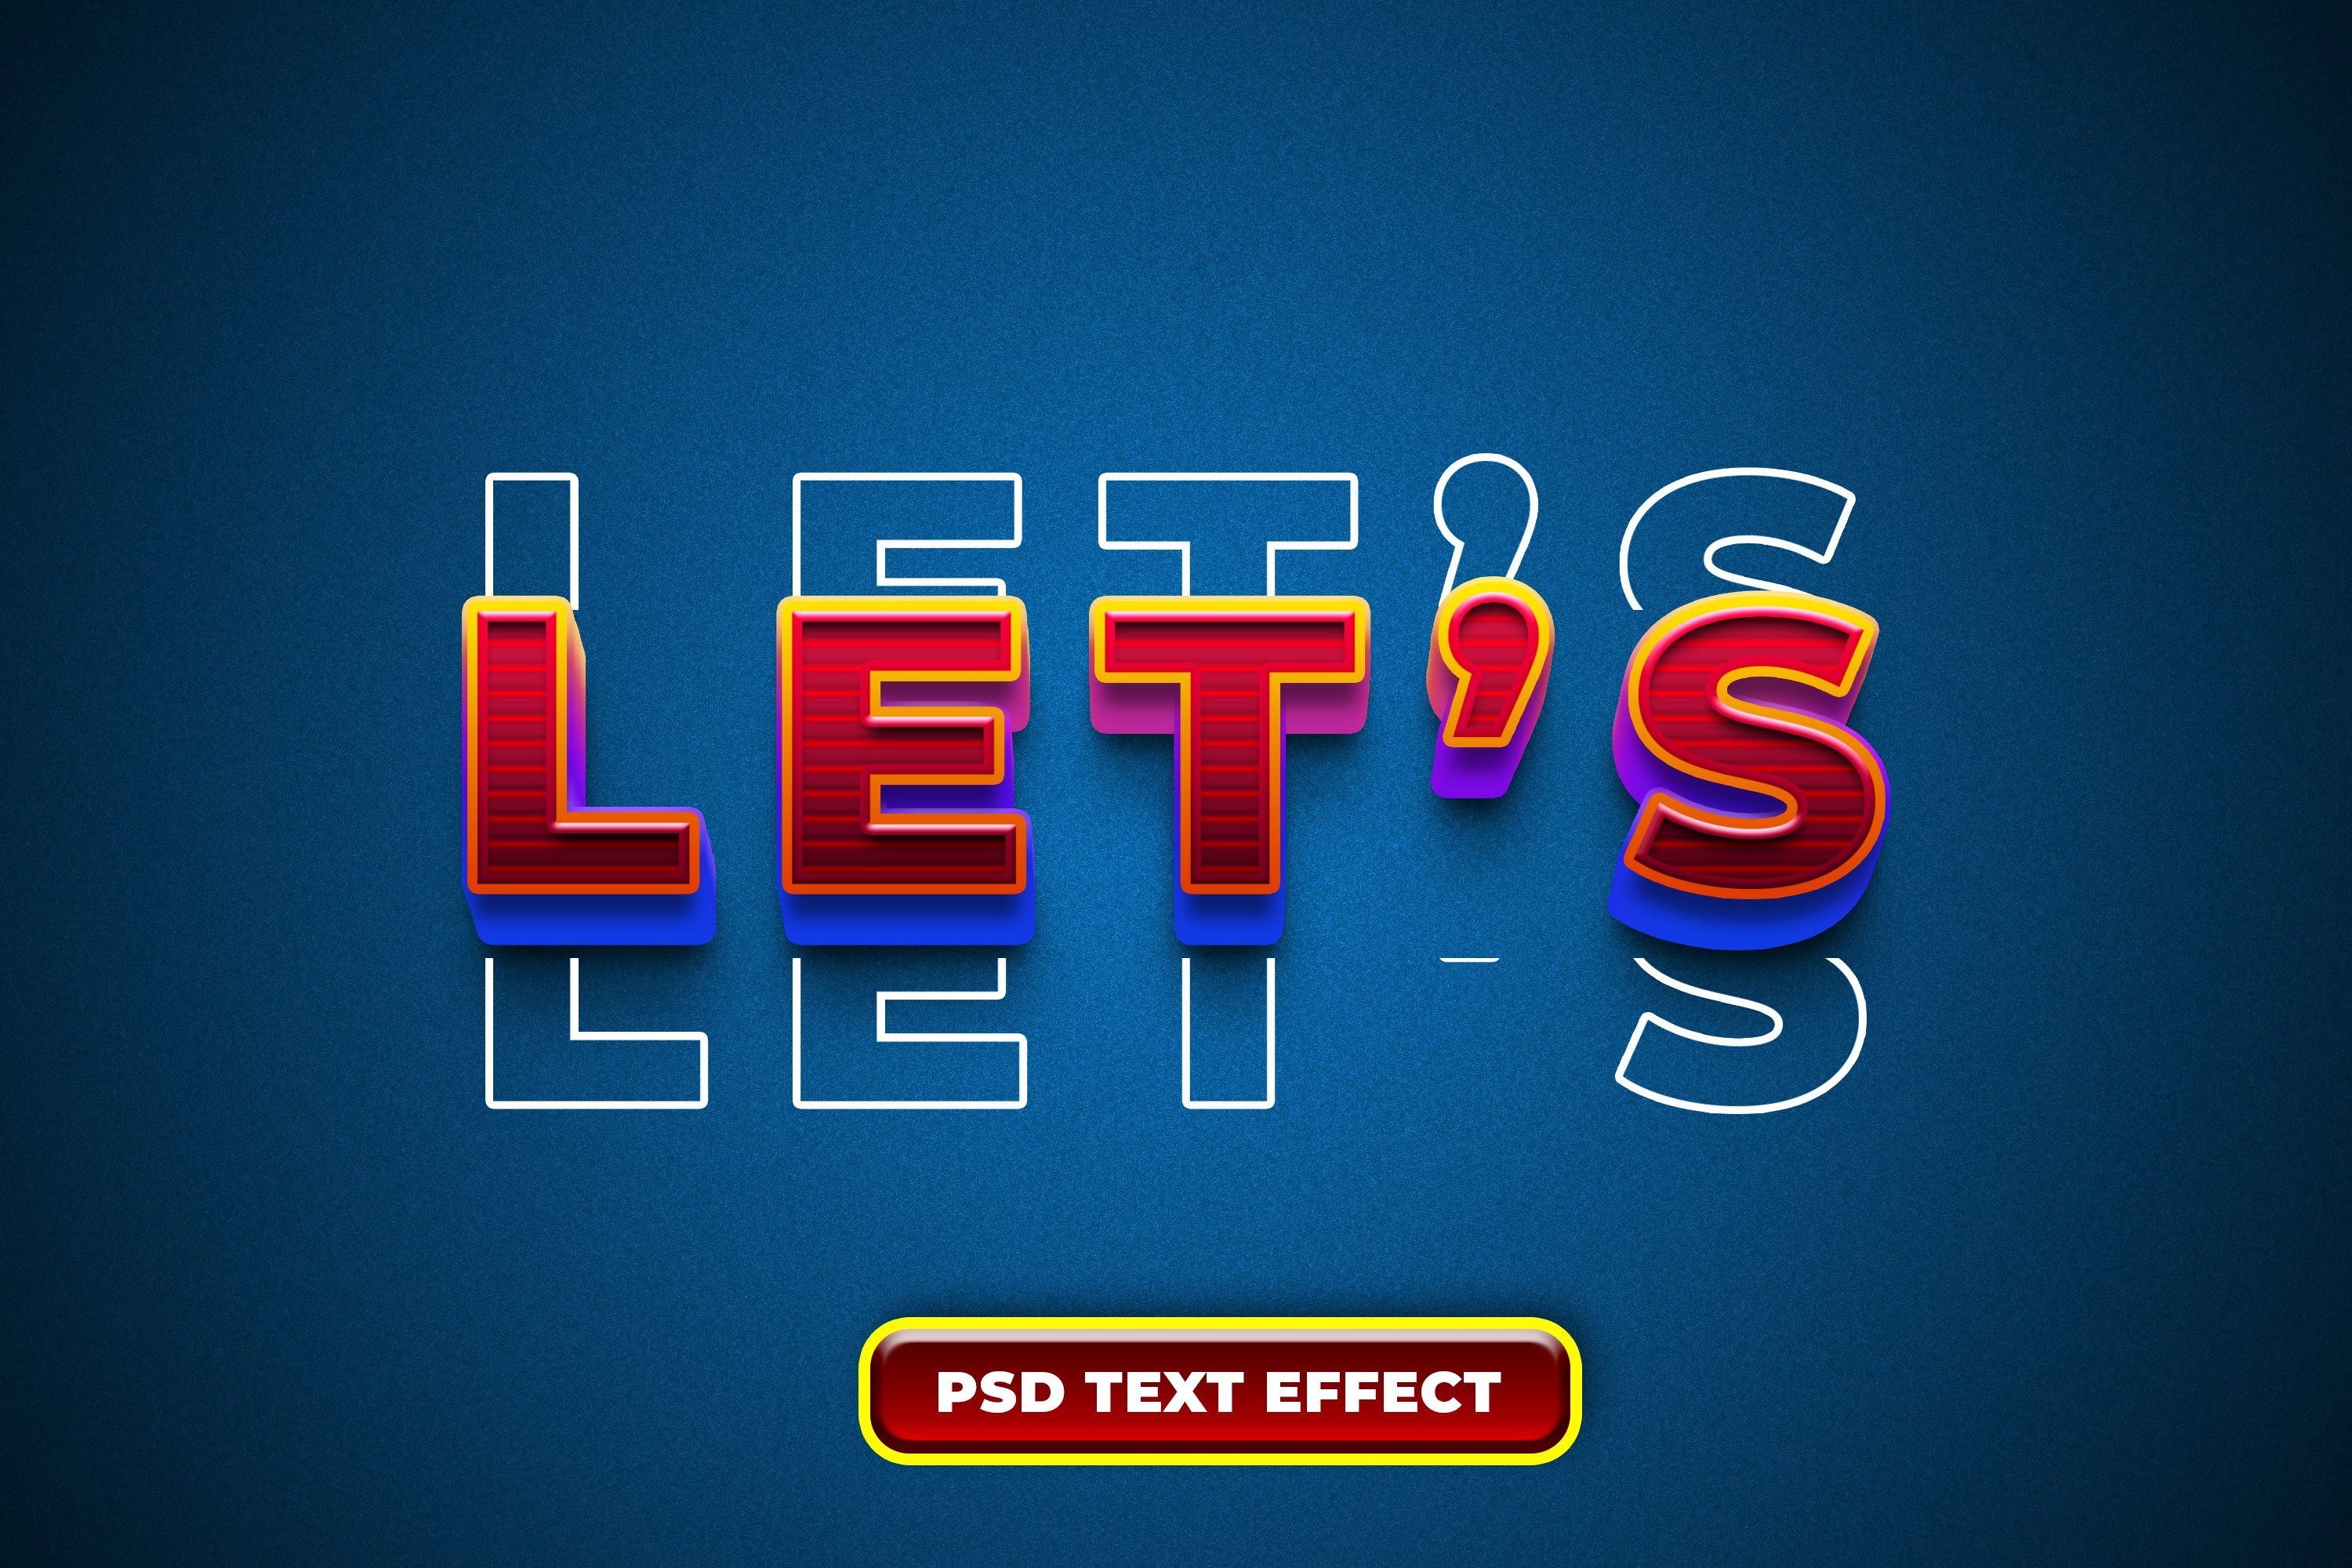 let's word text effect mockupcover image.